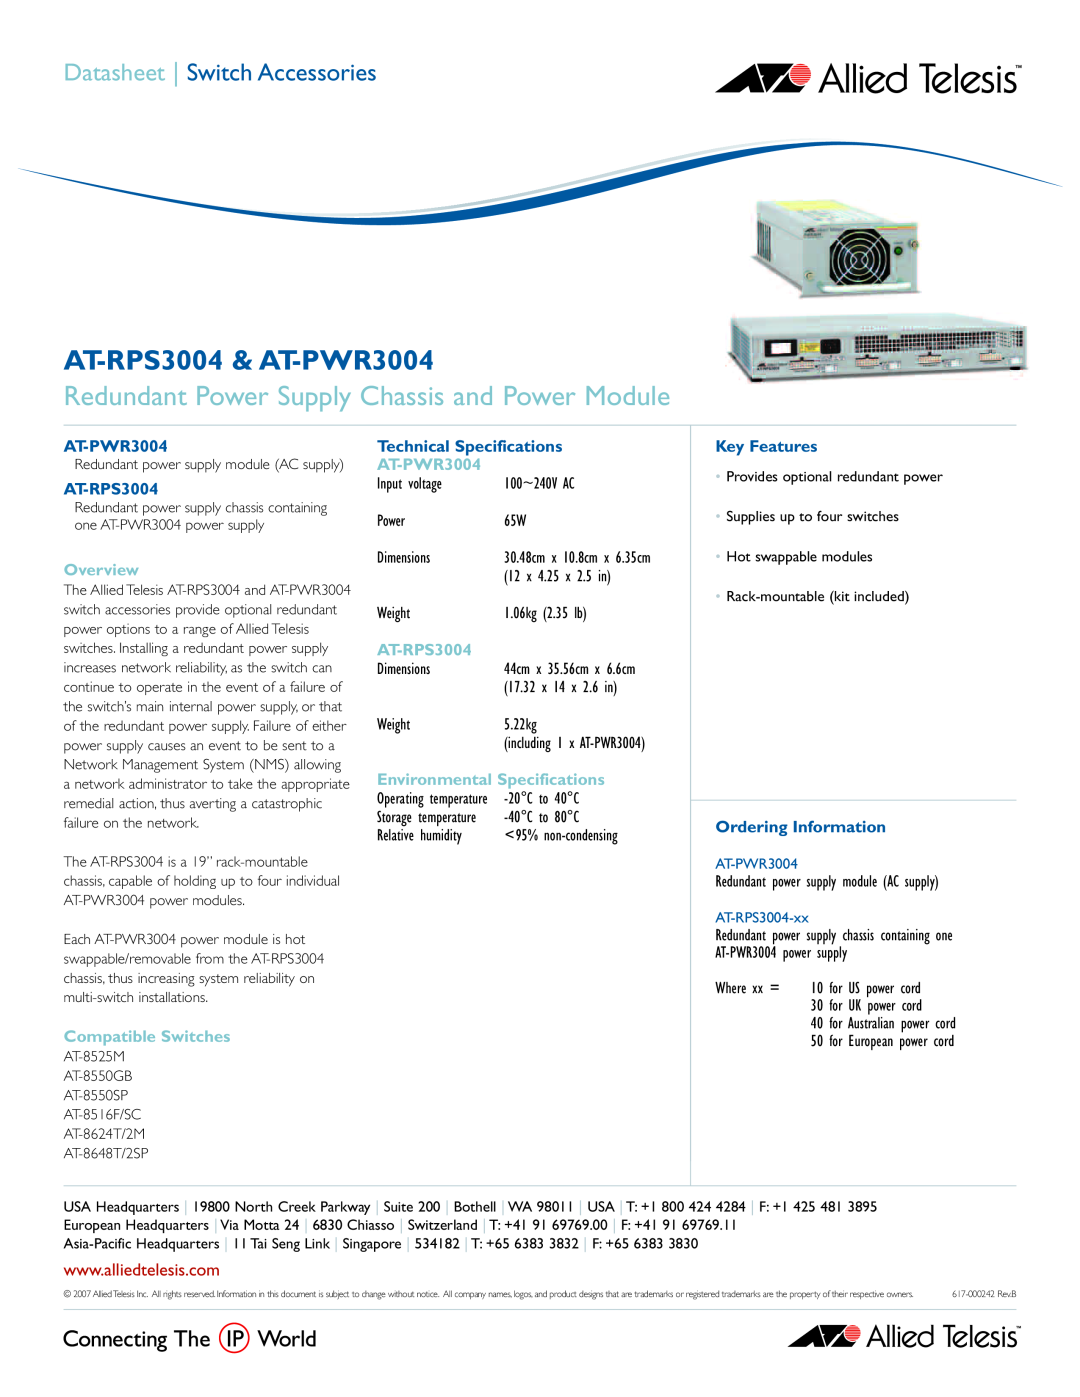 Allied Telesis technical specifications AT-RPS3004 & AT-PWR3004, Redundant Power Supply Chassis and Power Module 